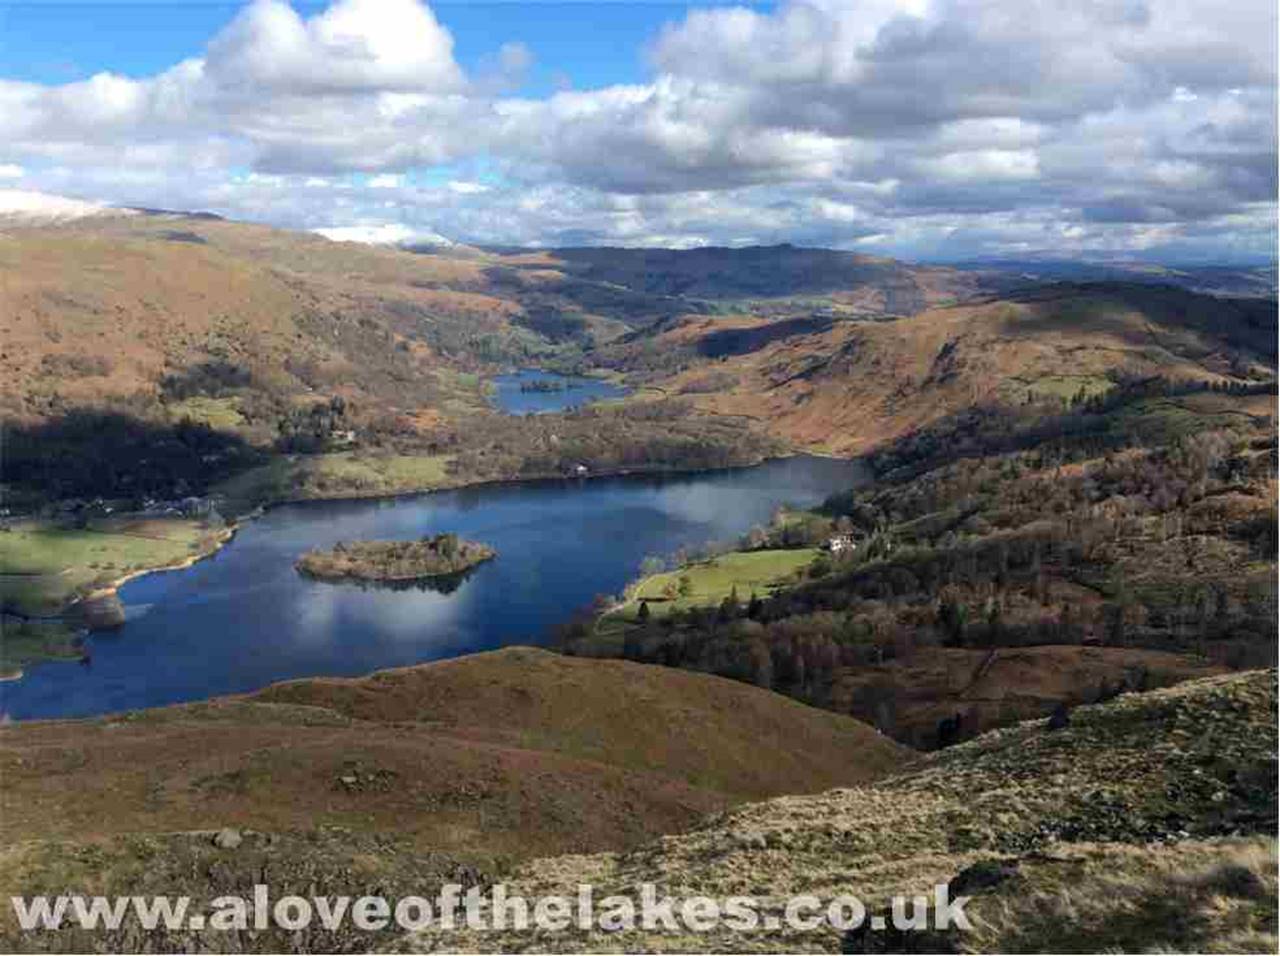 Stunning views of Grasmere and Rydal Water